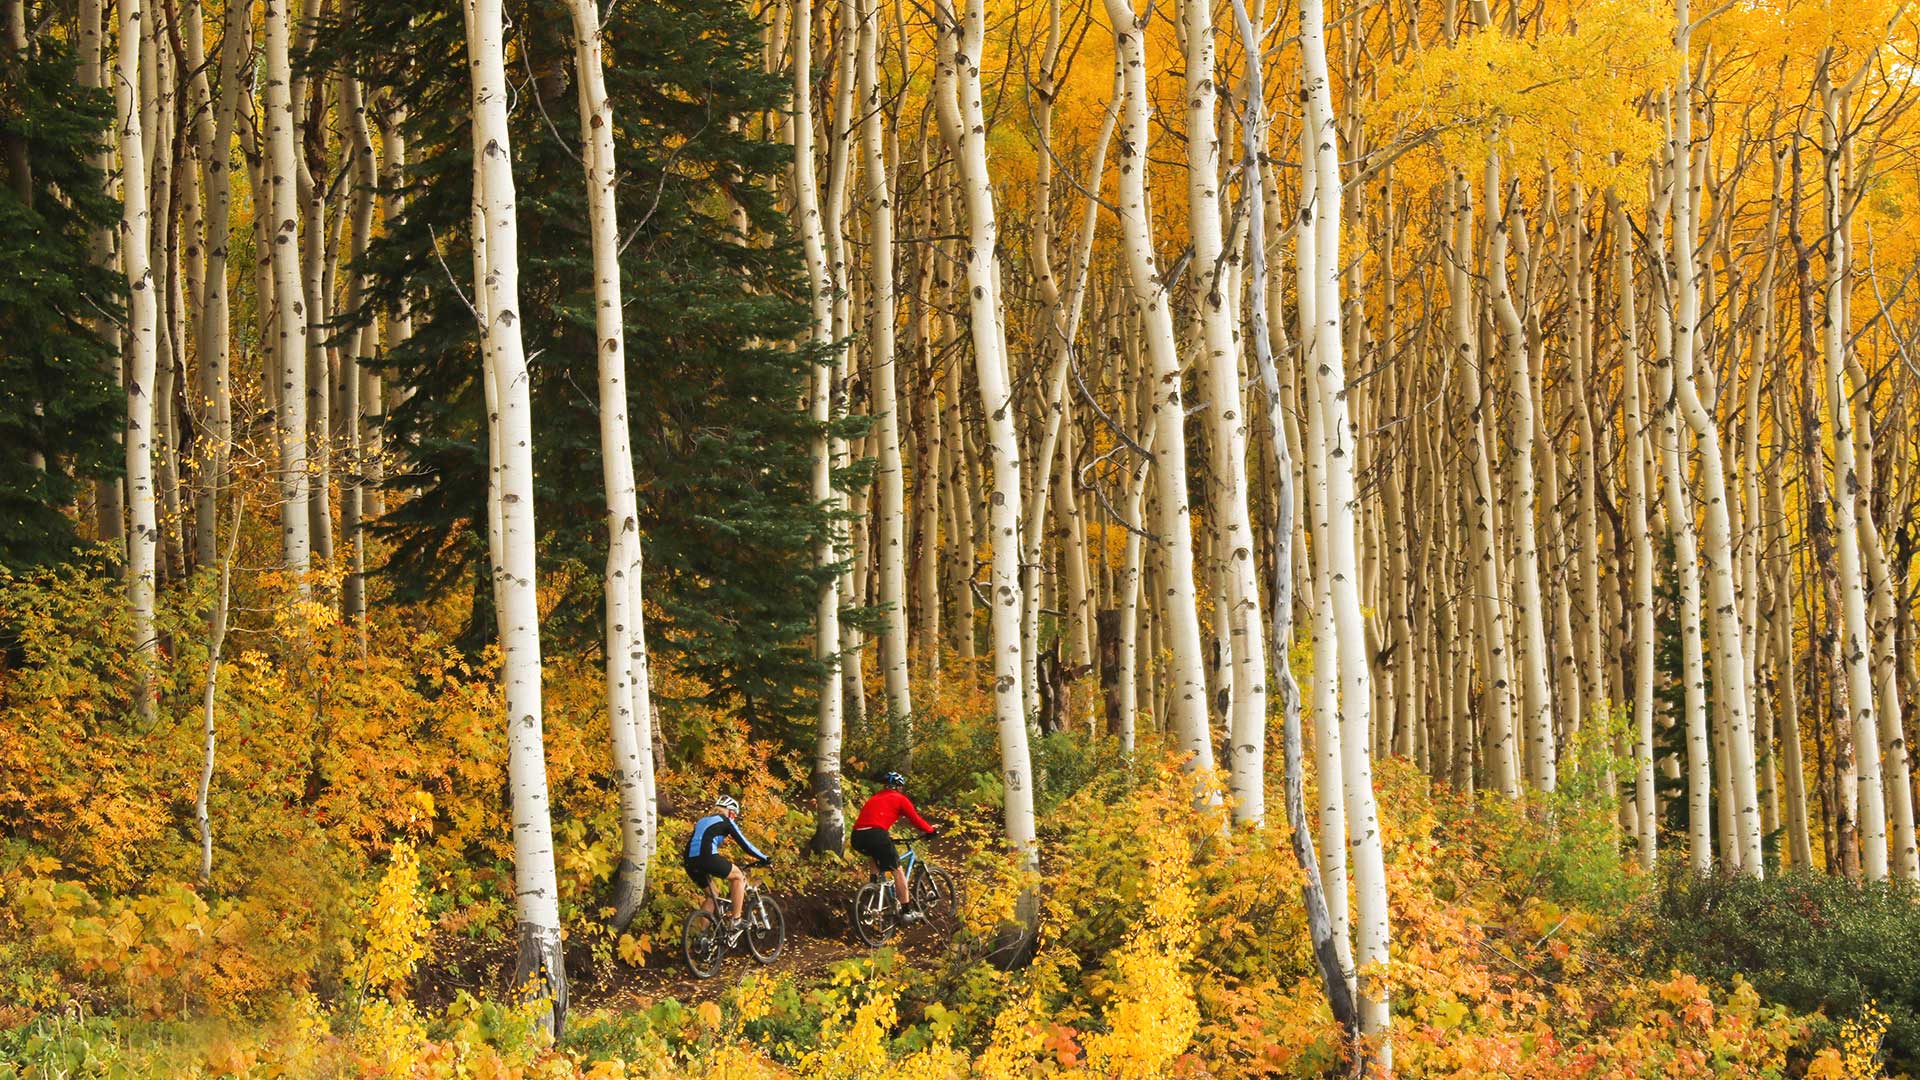 Bikers going through trees in Aspen during the fall